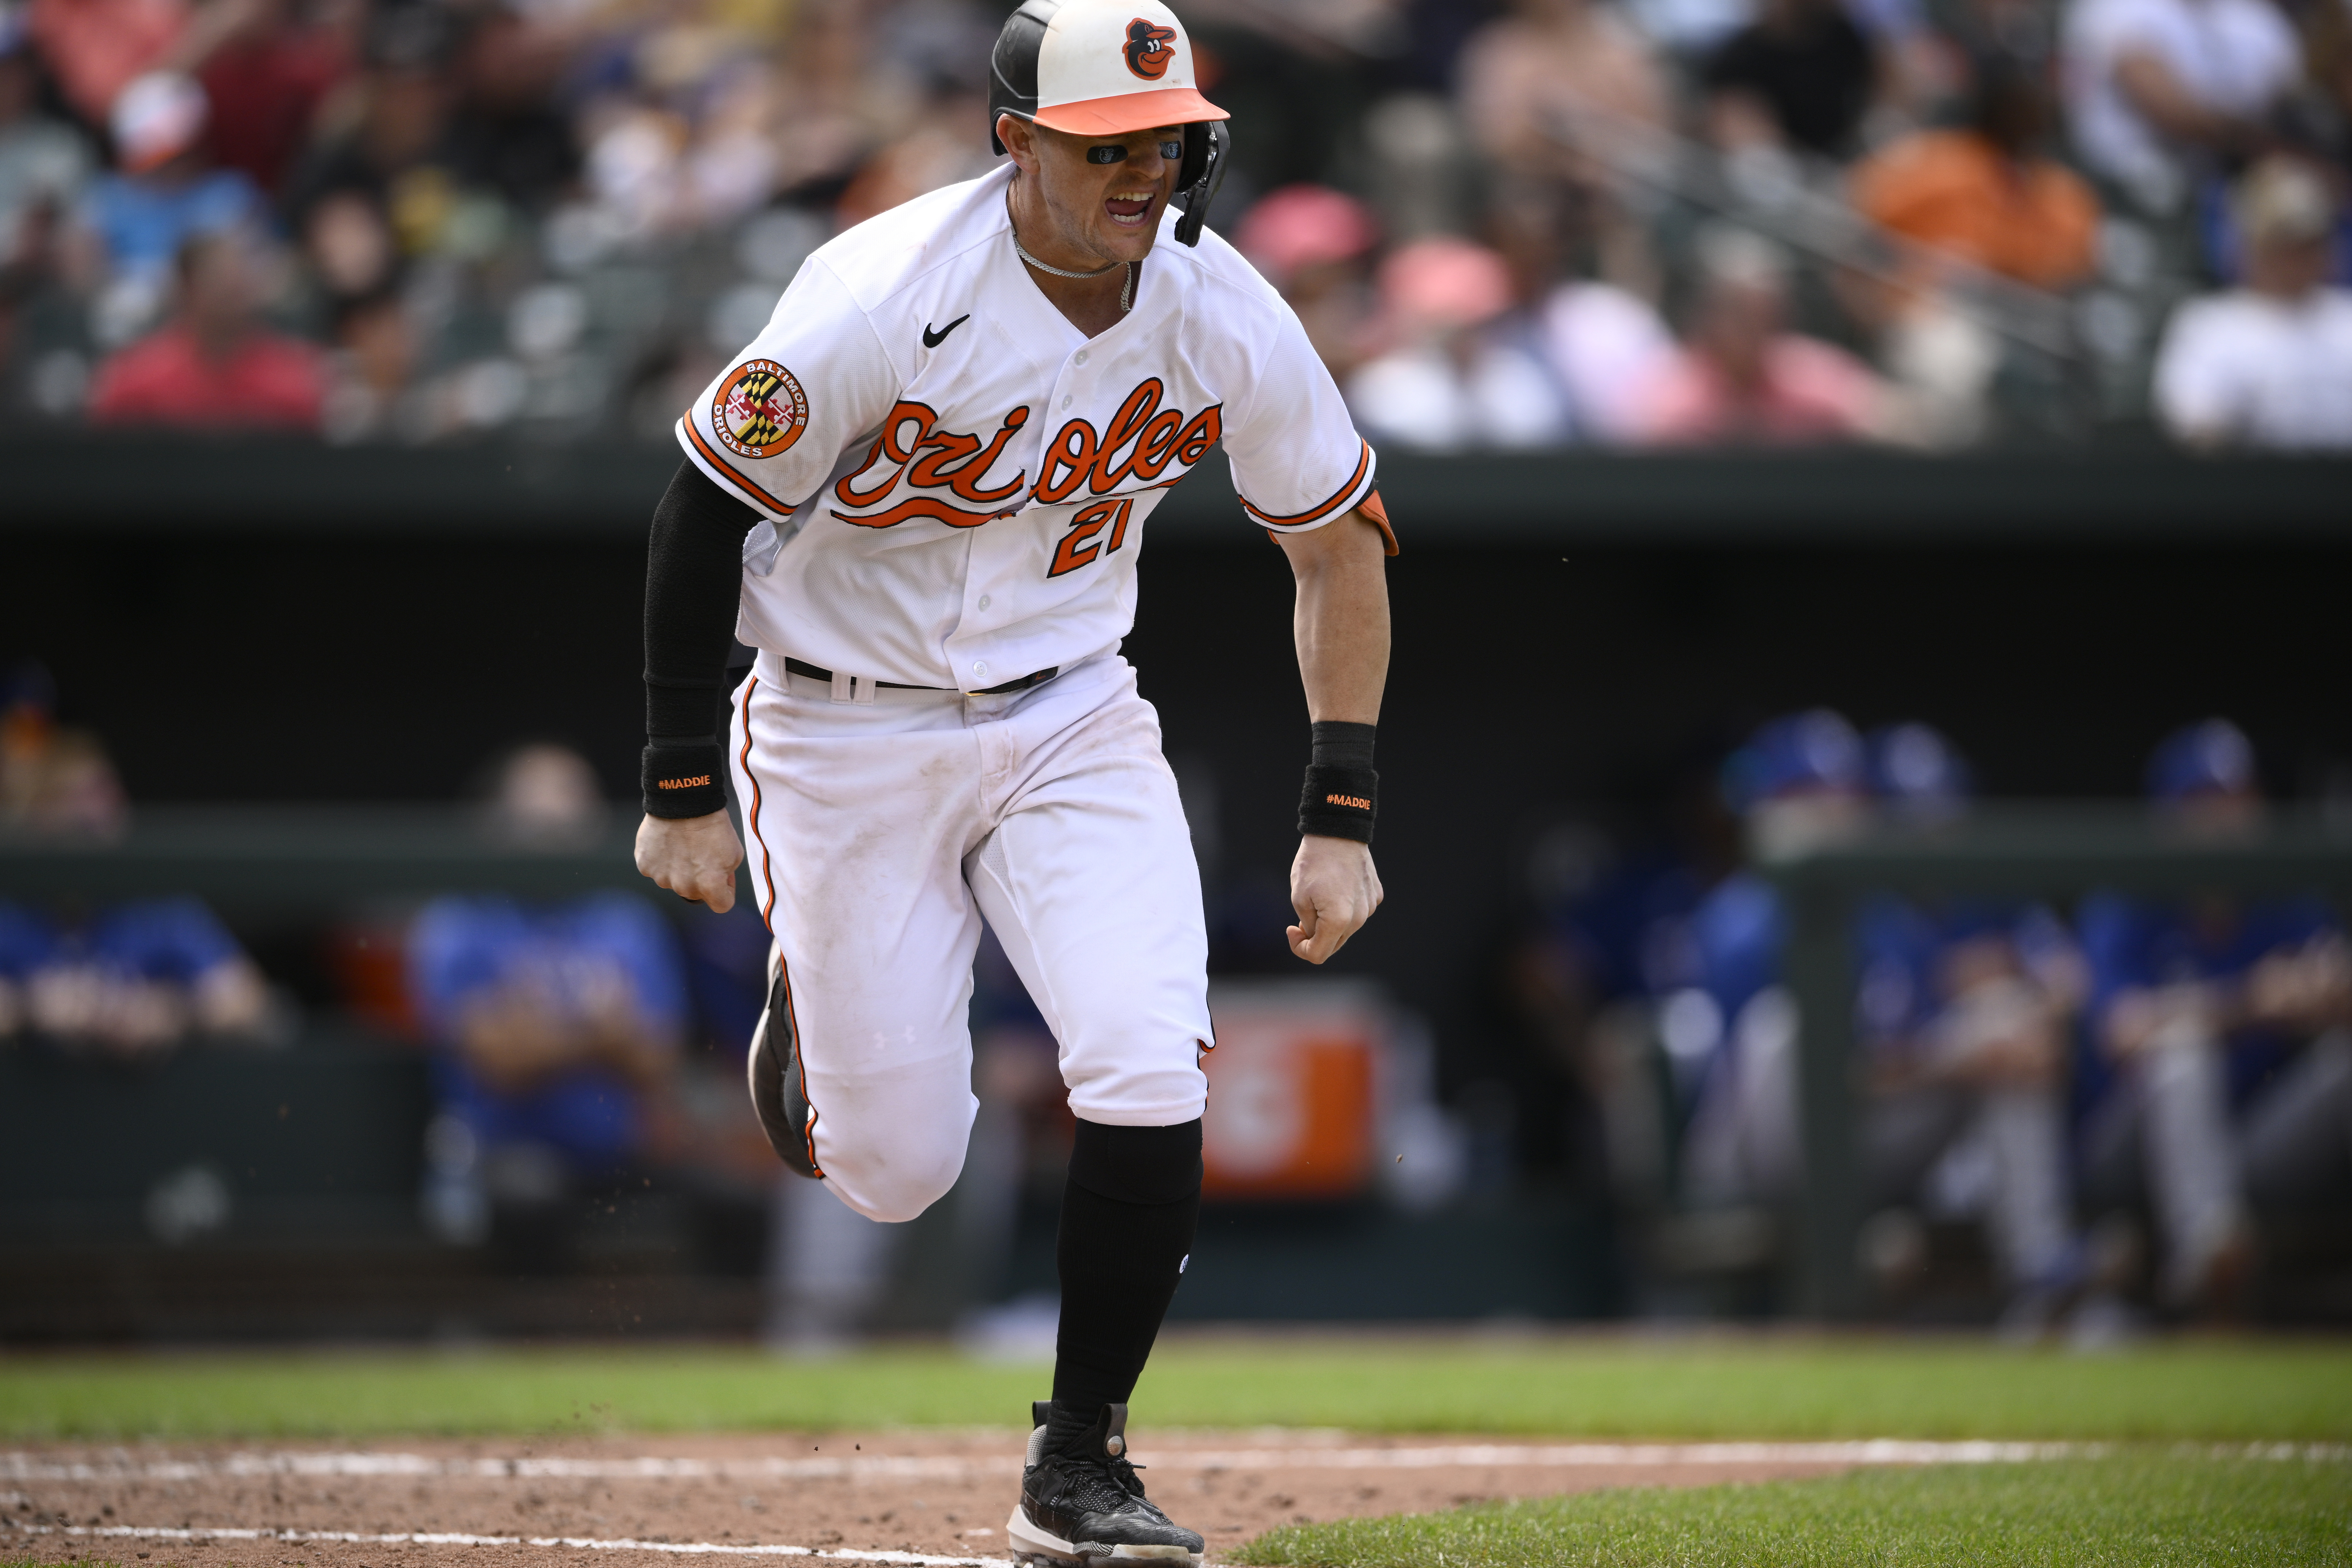 Orioles complete 3-game sweep of Rangers with 2-1 win